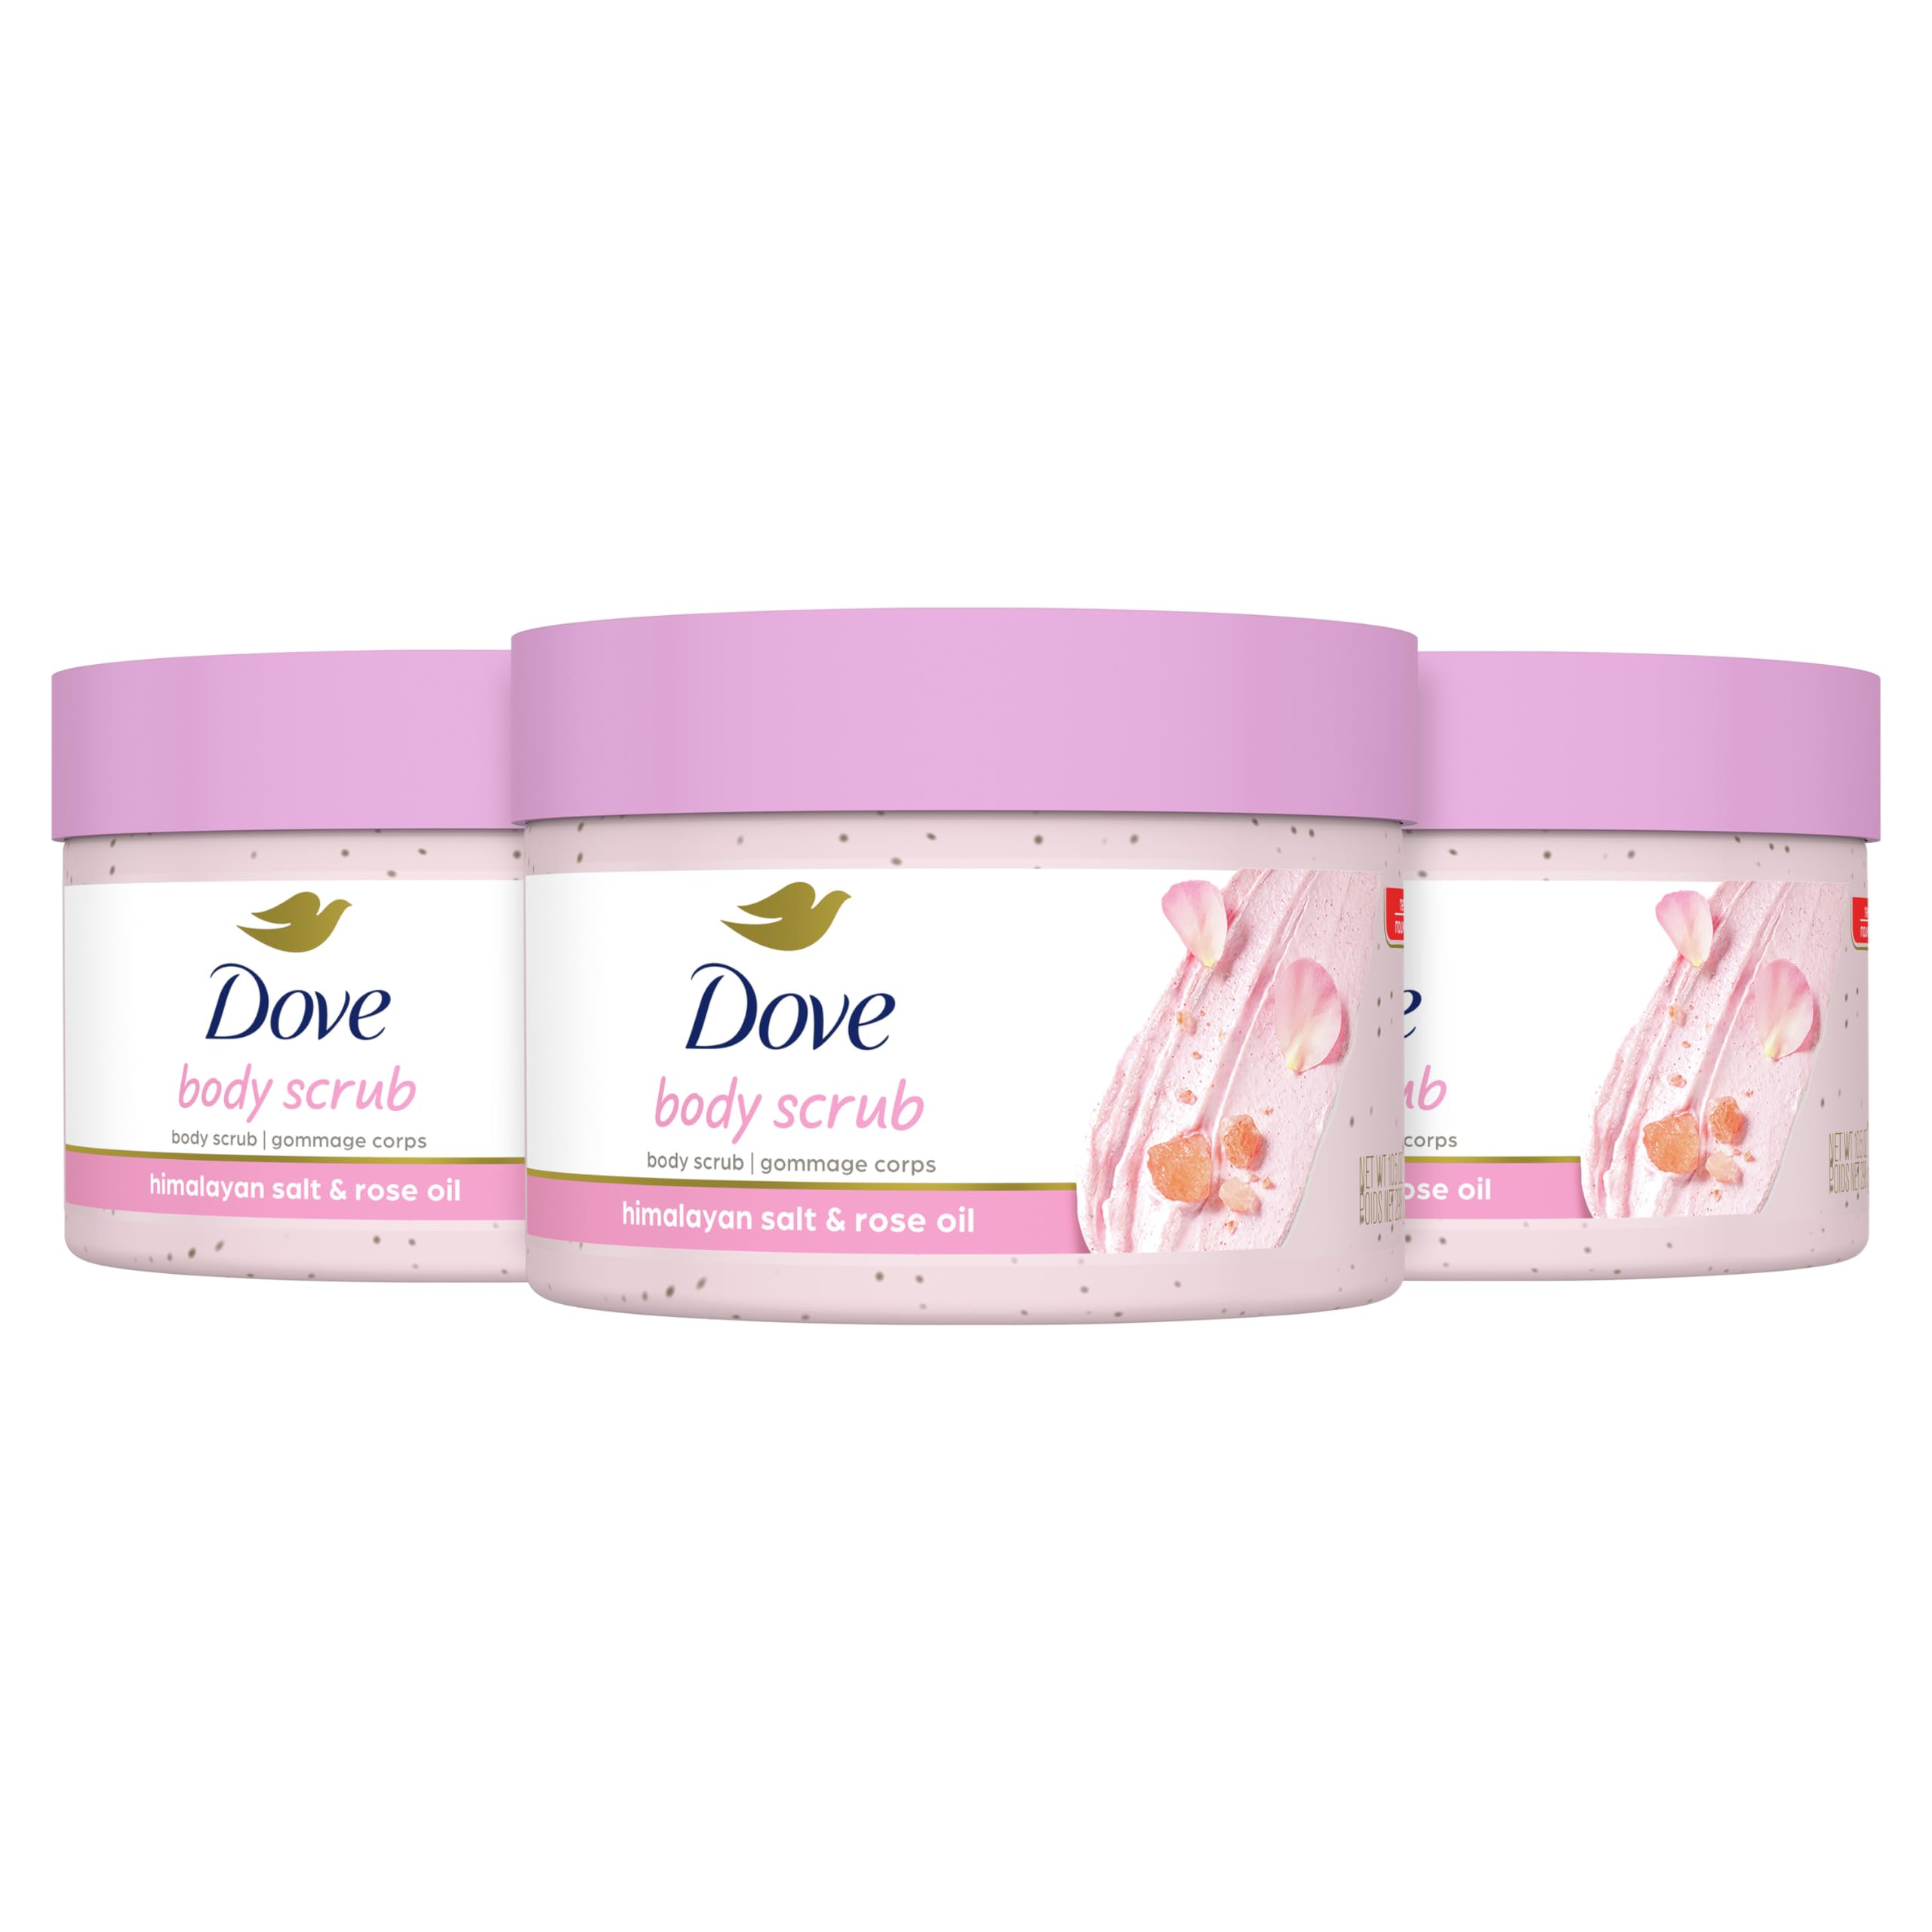 Dove Body Scrub Himalayan Salt & Rose Oil 3 Count for Visibly Silky-Smooth, Nourished Skin, with ¼ Moisturizing Cream, 10.5 oz